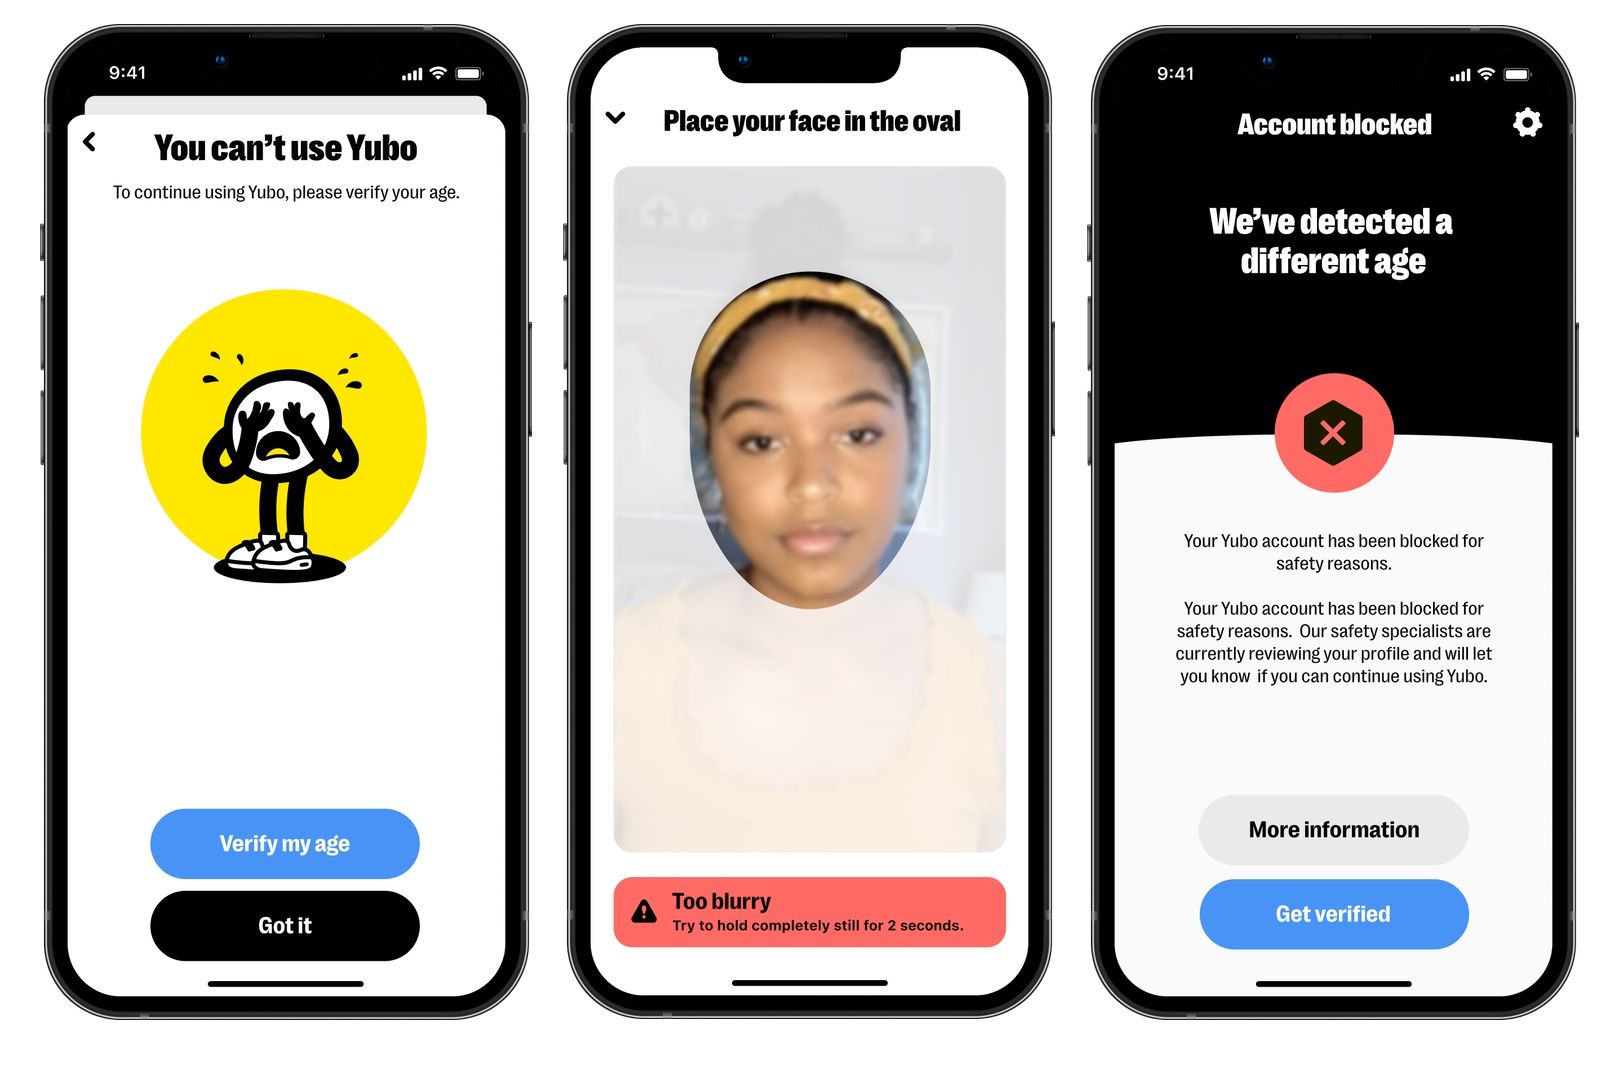 Yubo rolls out innovative age verification to 100% of users photo 1